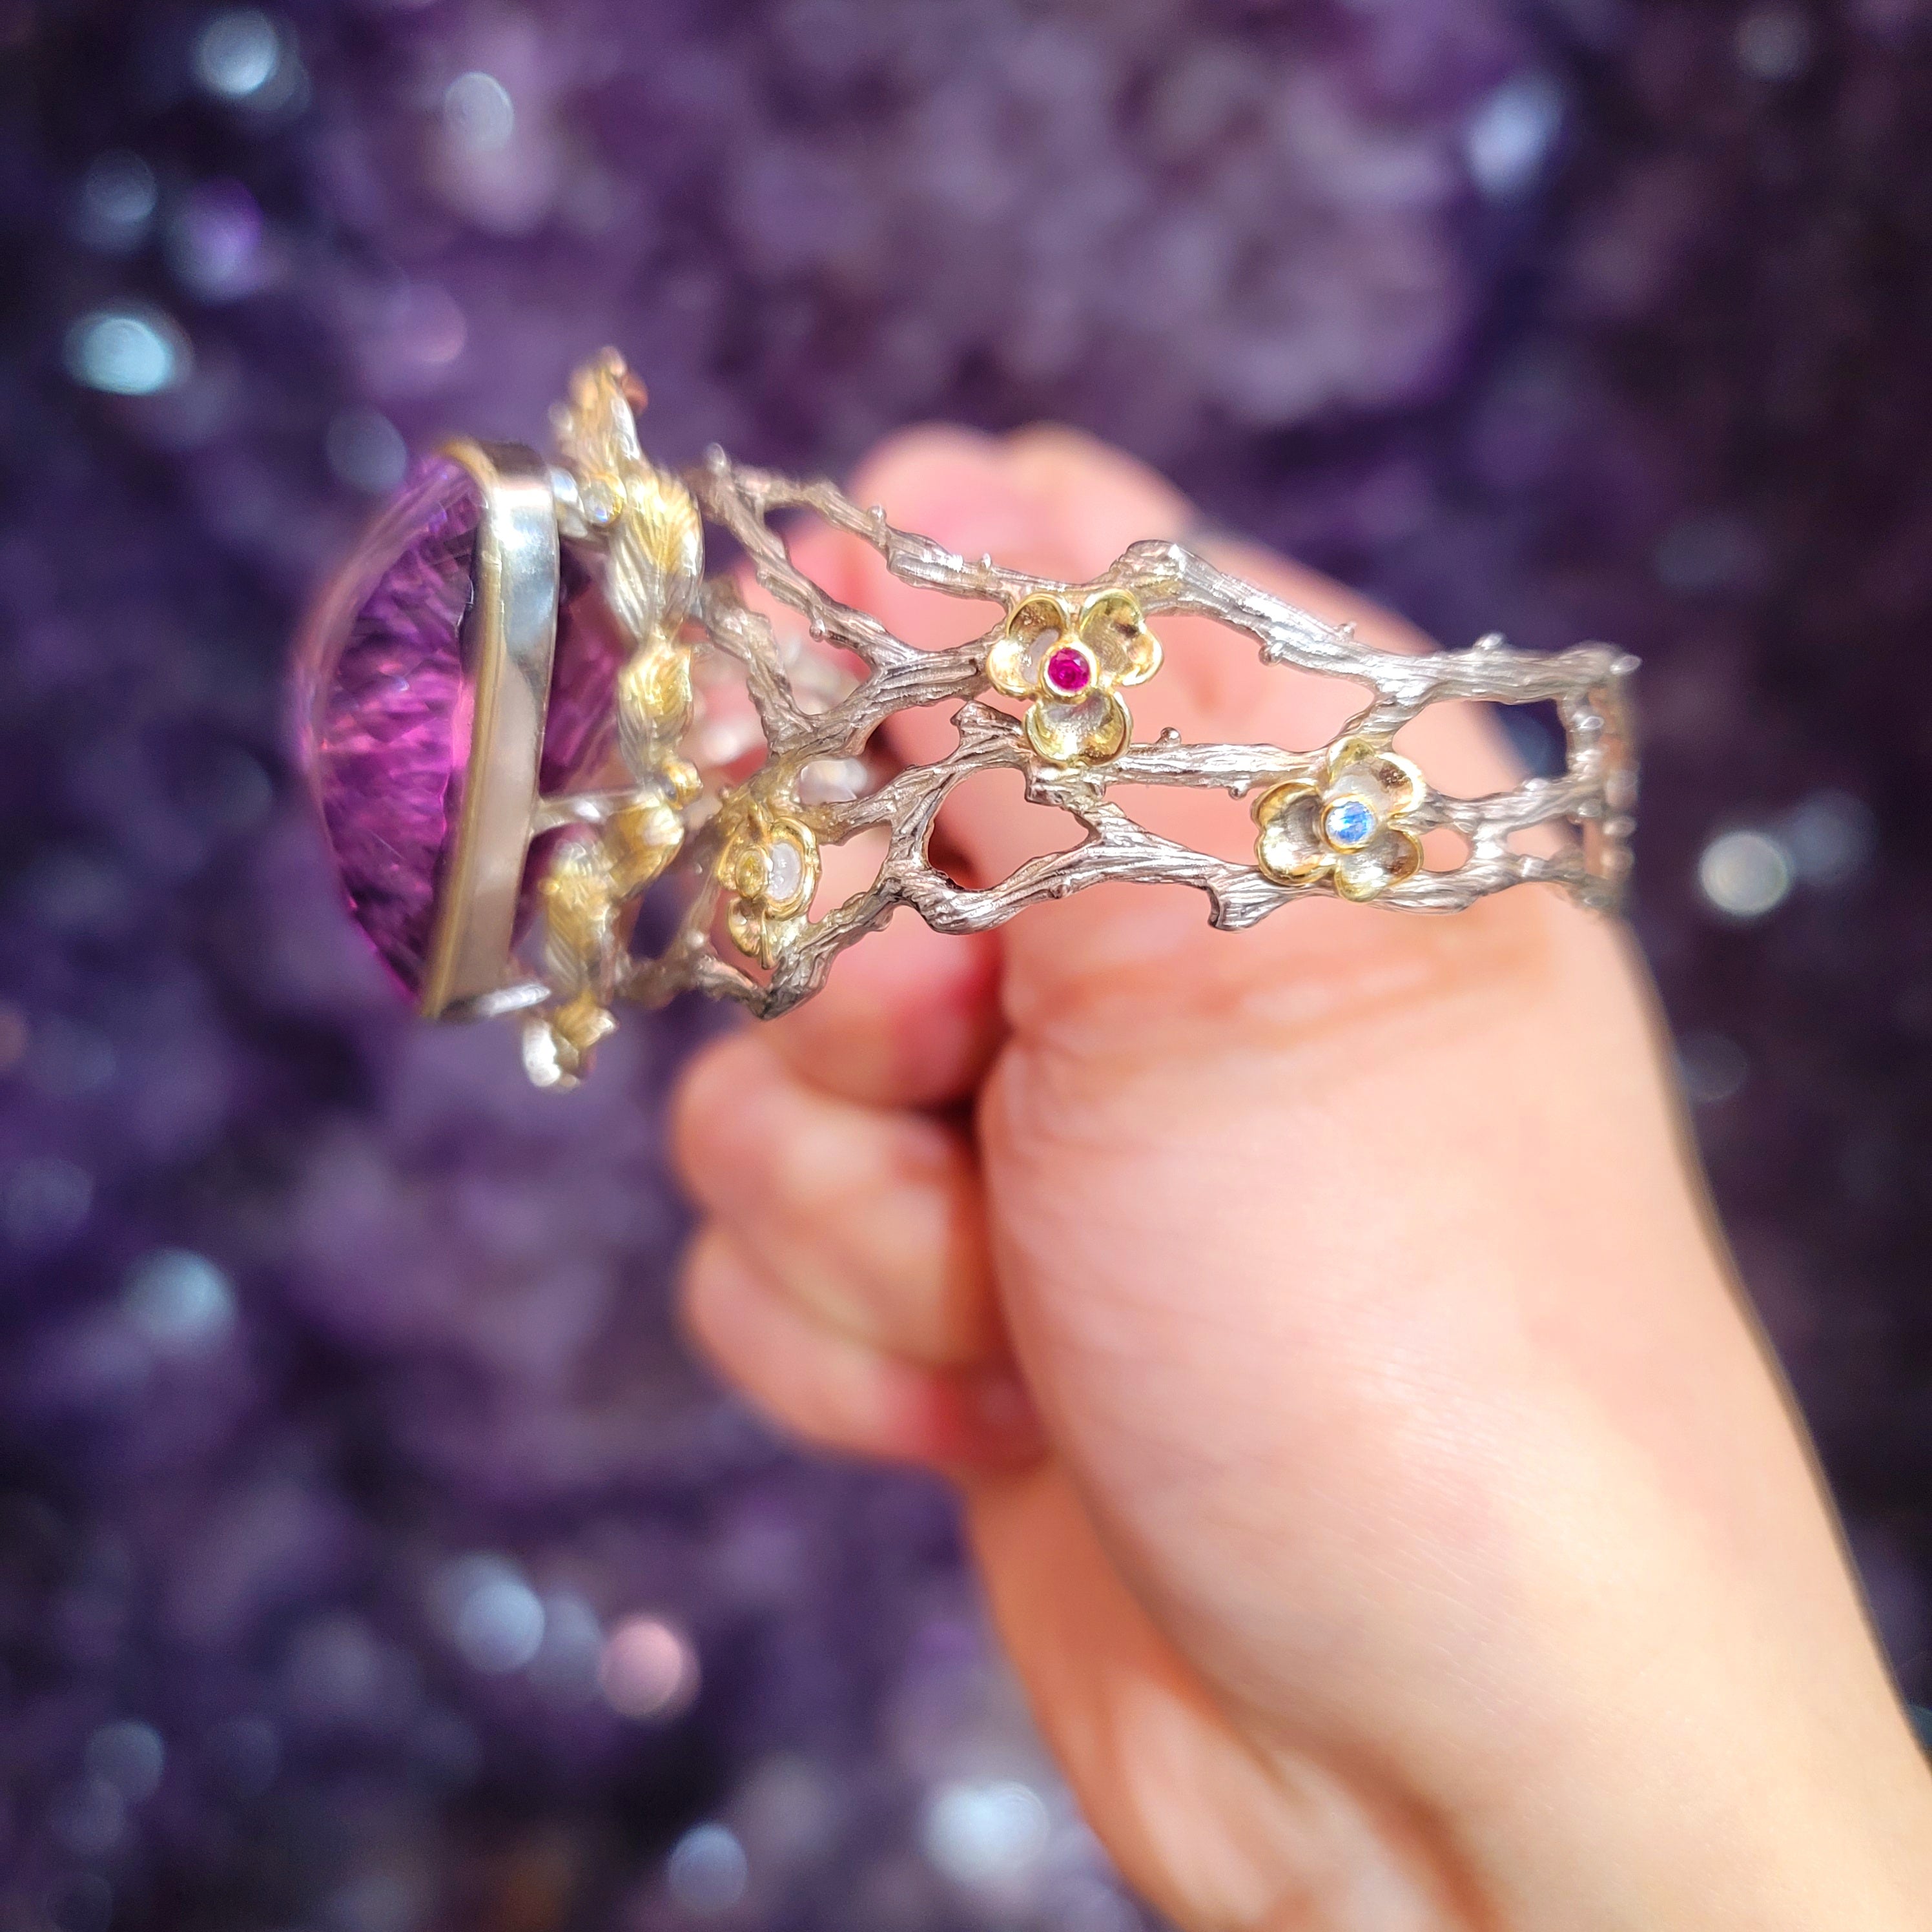 Amethyst Enchanted Cuff Bracelet for Intuition, Connection with the Divine and Sobriety